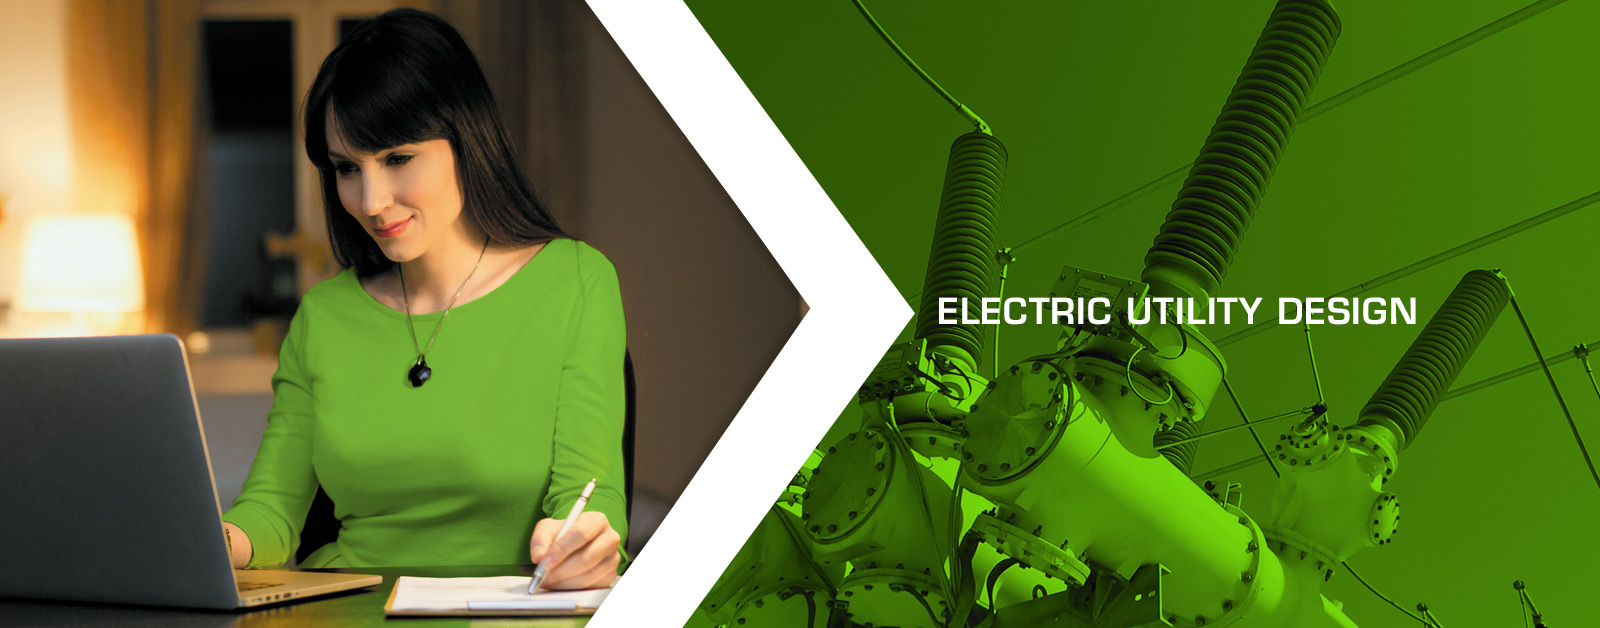 electric utility design engineering firm